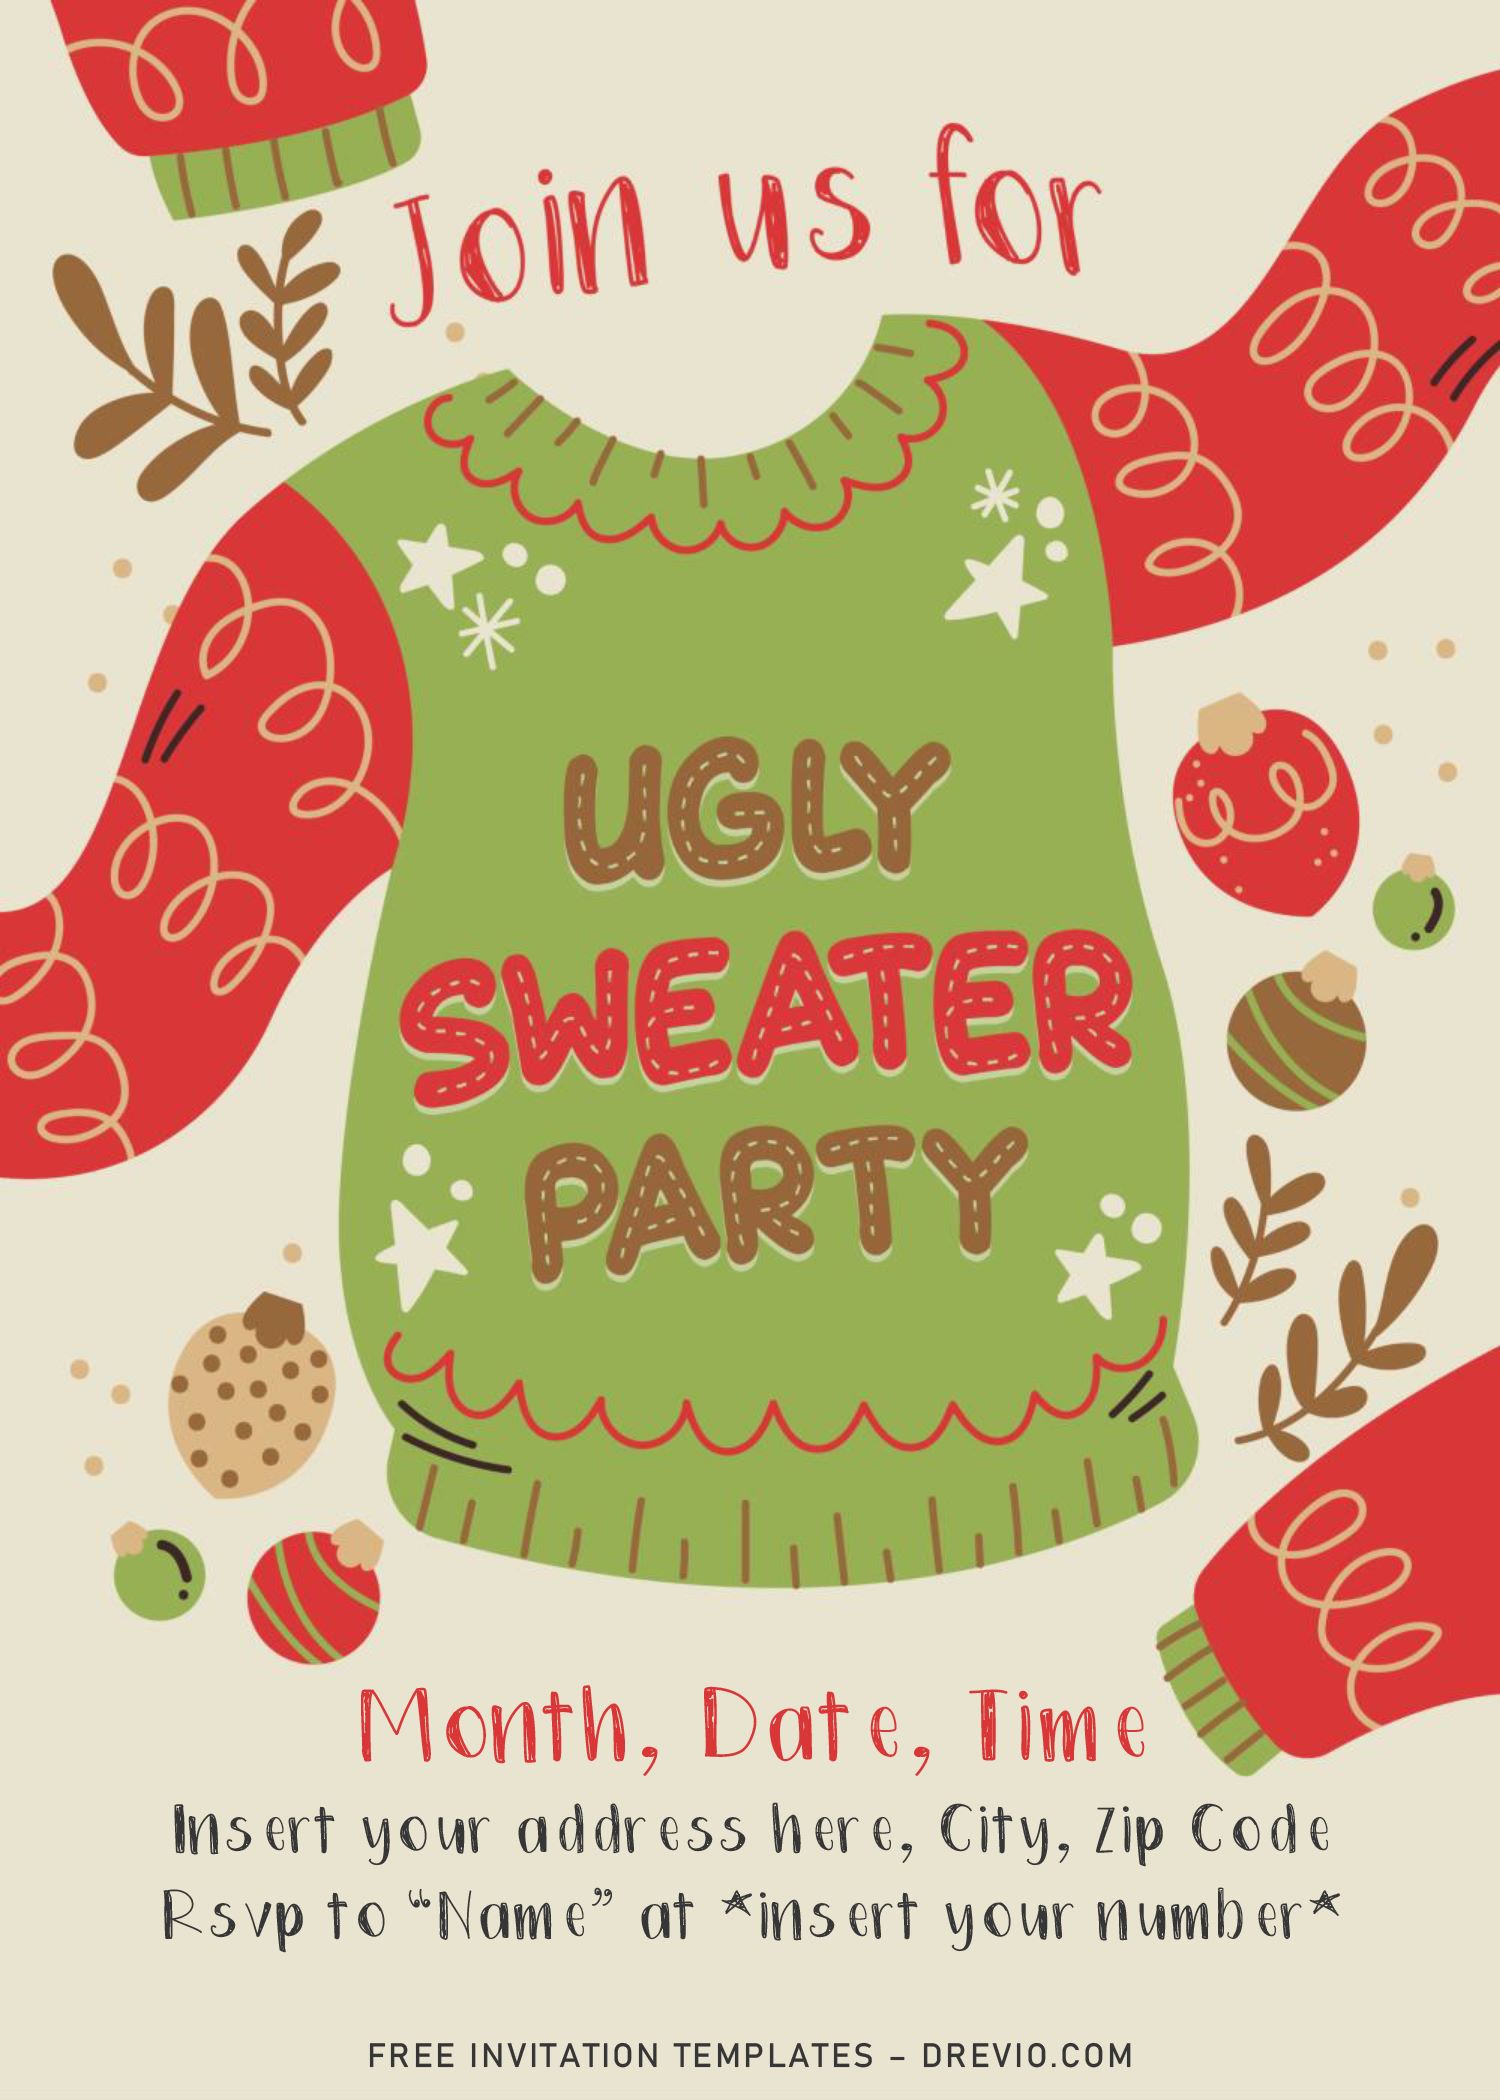 Free Ugly Sweater Party Flyer Templates